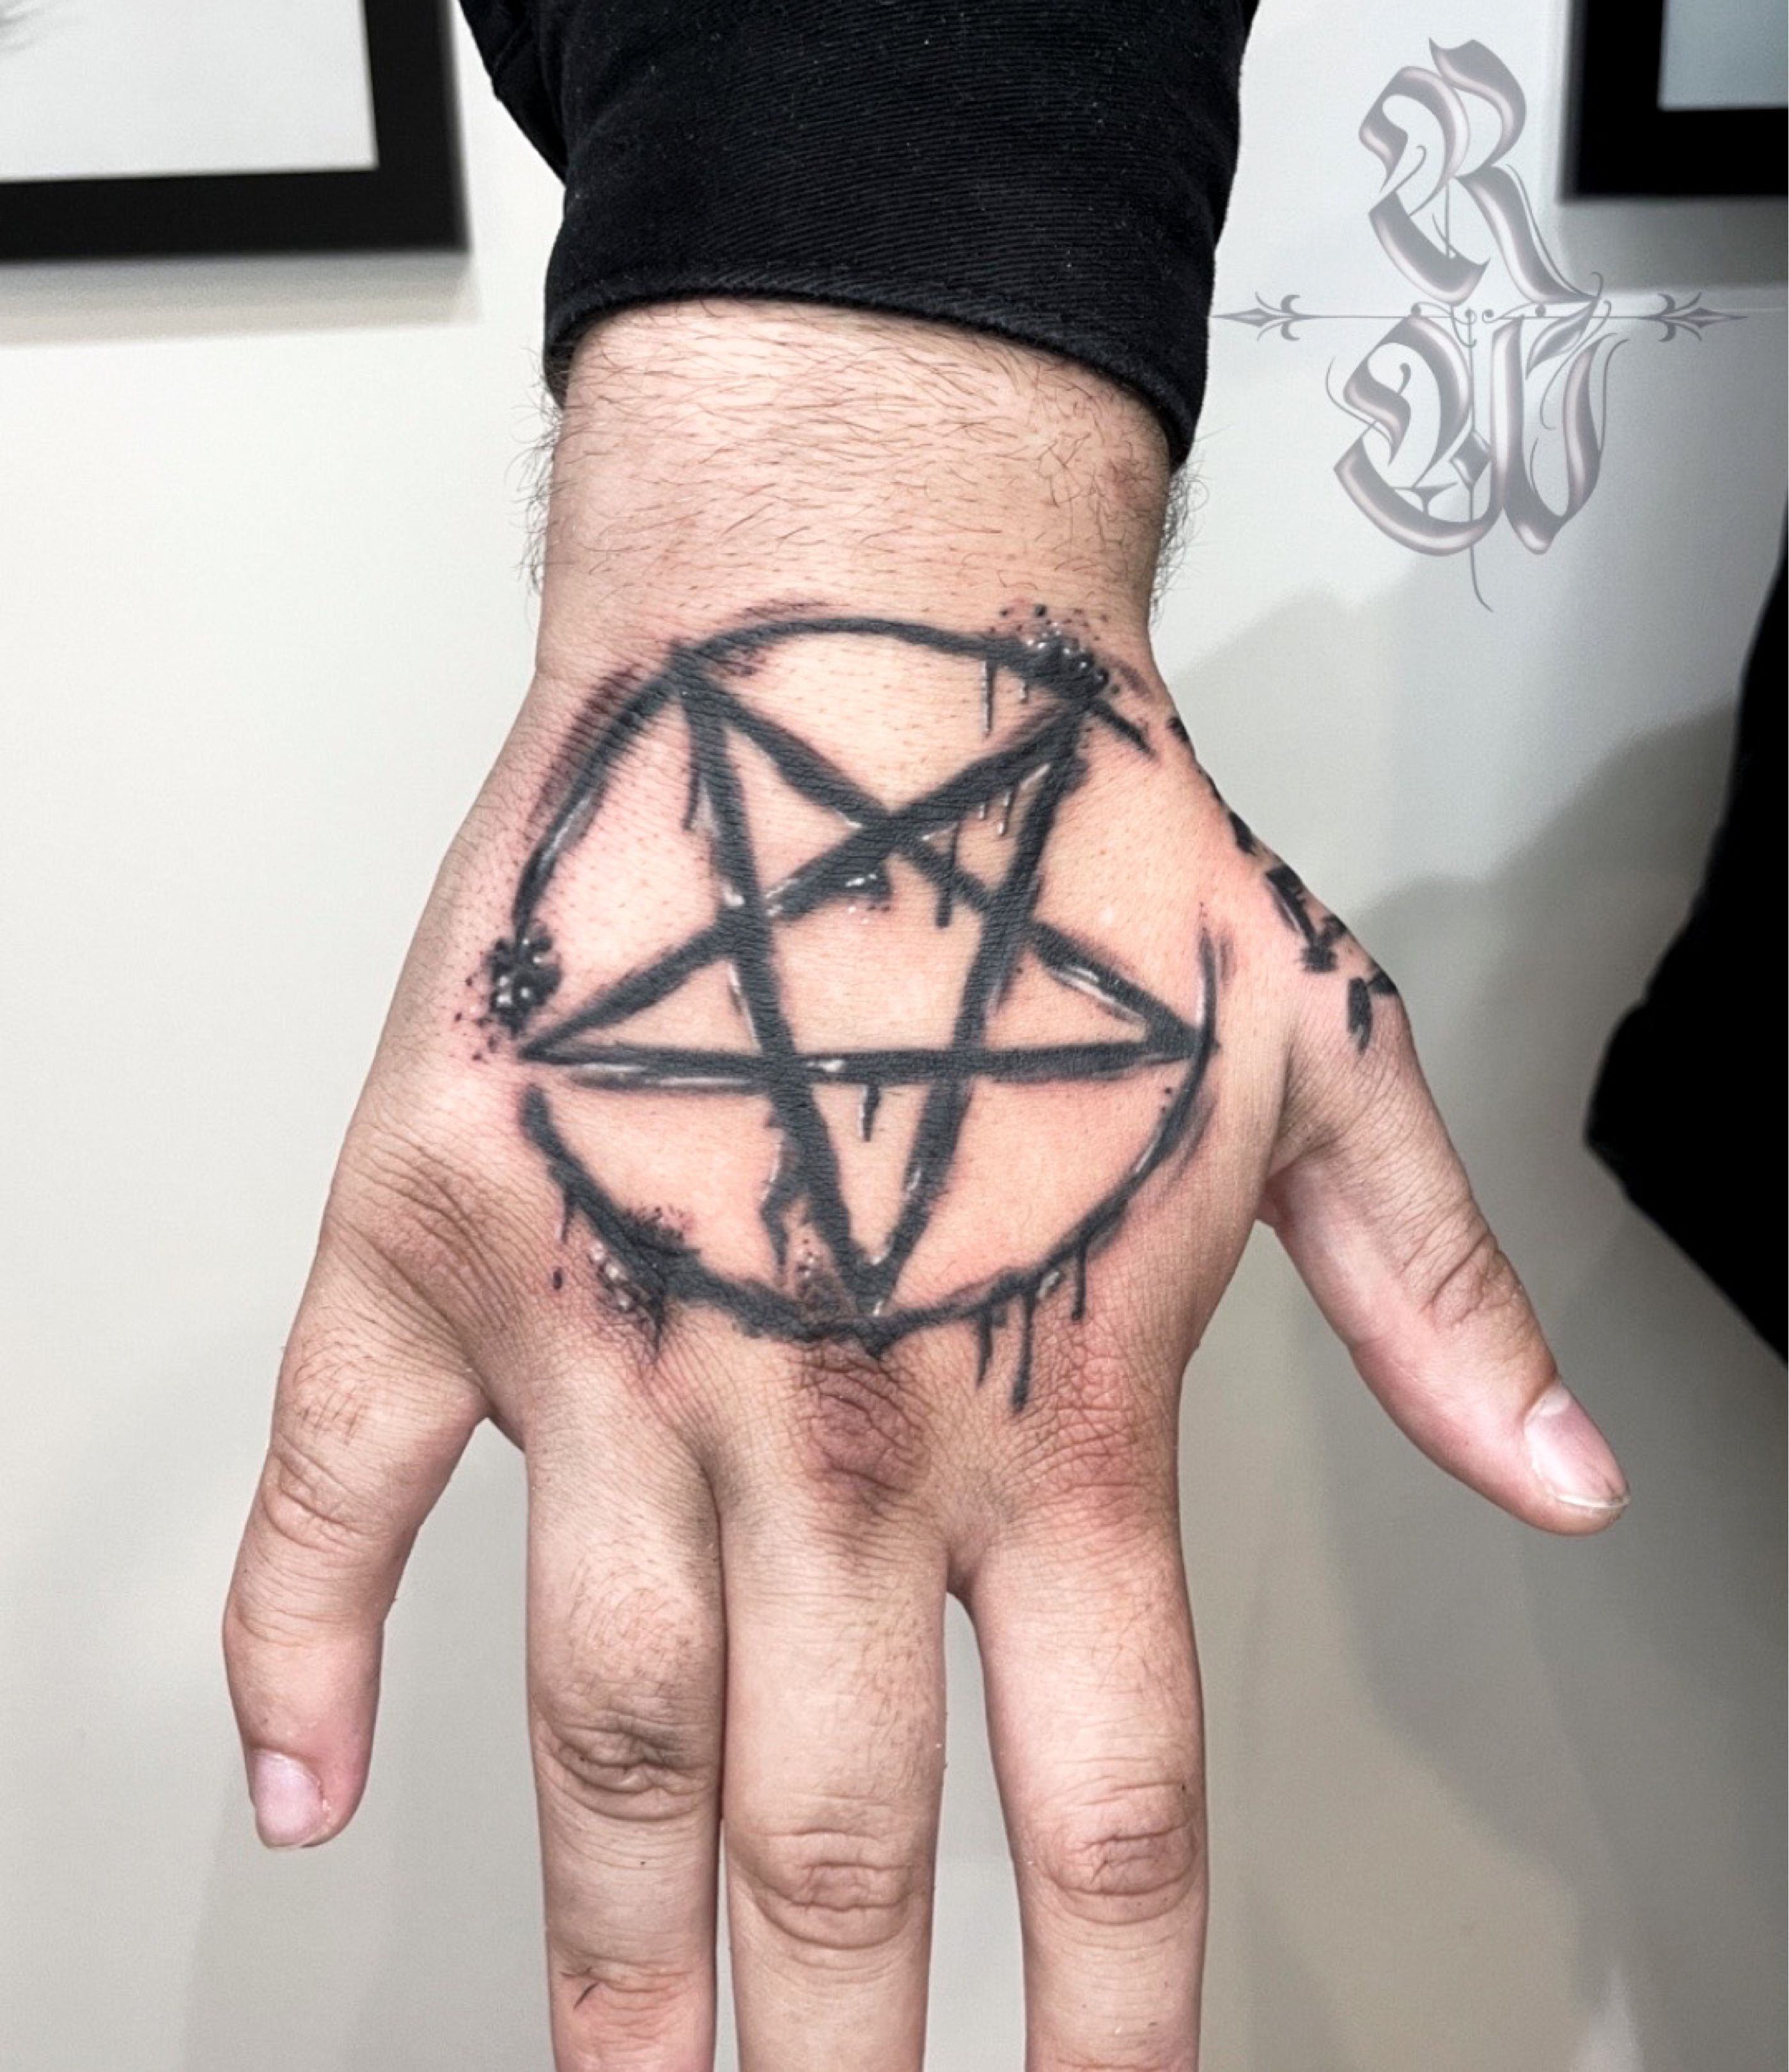 Is having a tattoo of a pentagram star without a circle around it still  considered a satanic symbol? - Quora